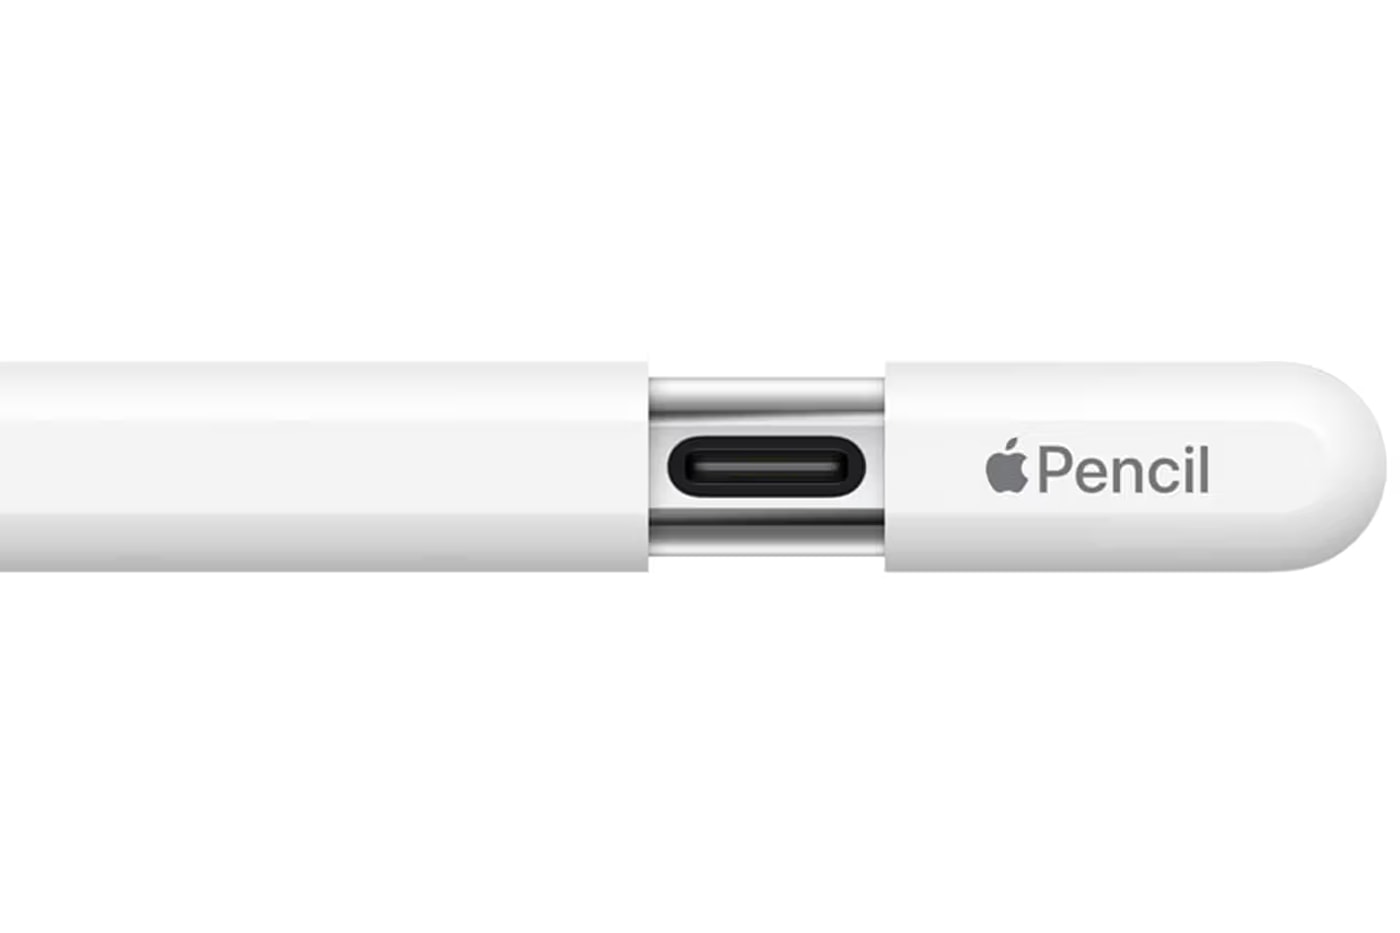 Apple Announces More Affordable, Entry-Level Apple Pencil ipad iphone 15 laptop tech release purchase charging usb c port cord plug magnetic sleep battery preserve cost november newsroom pair